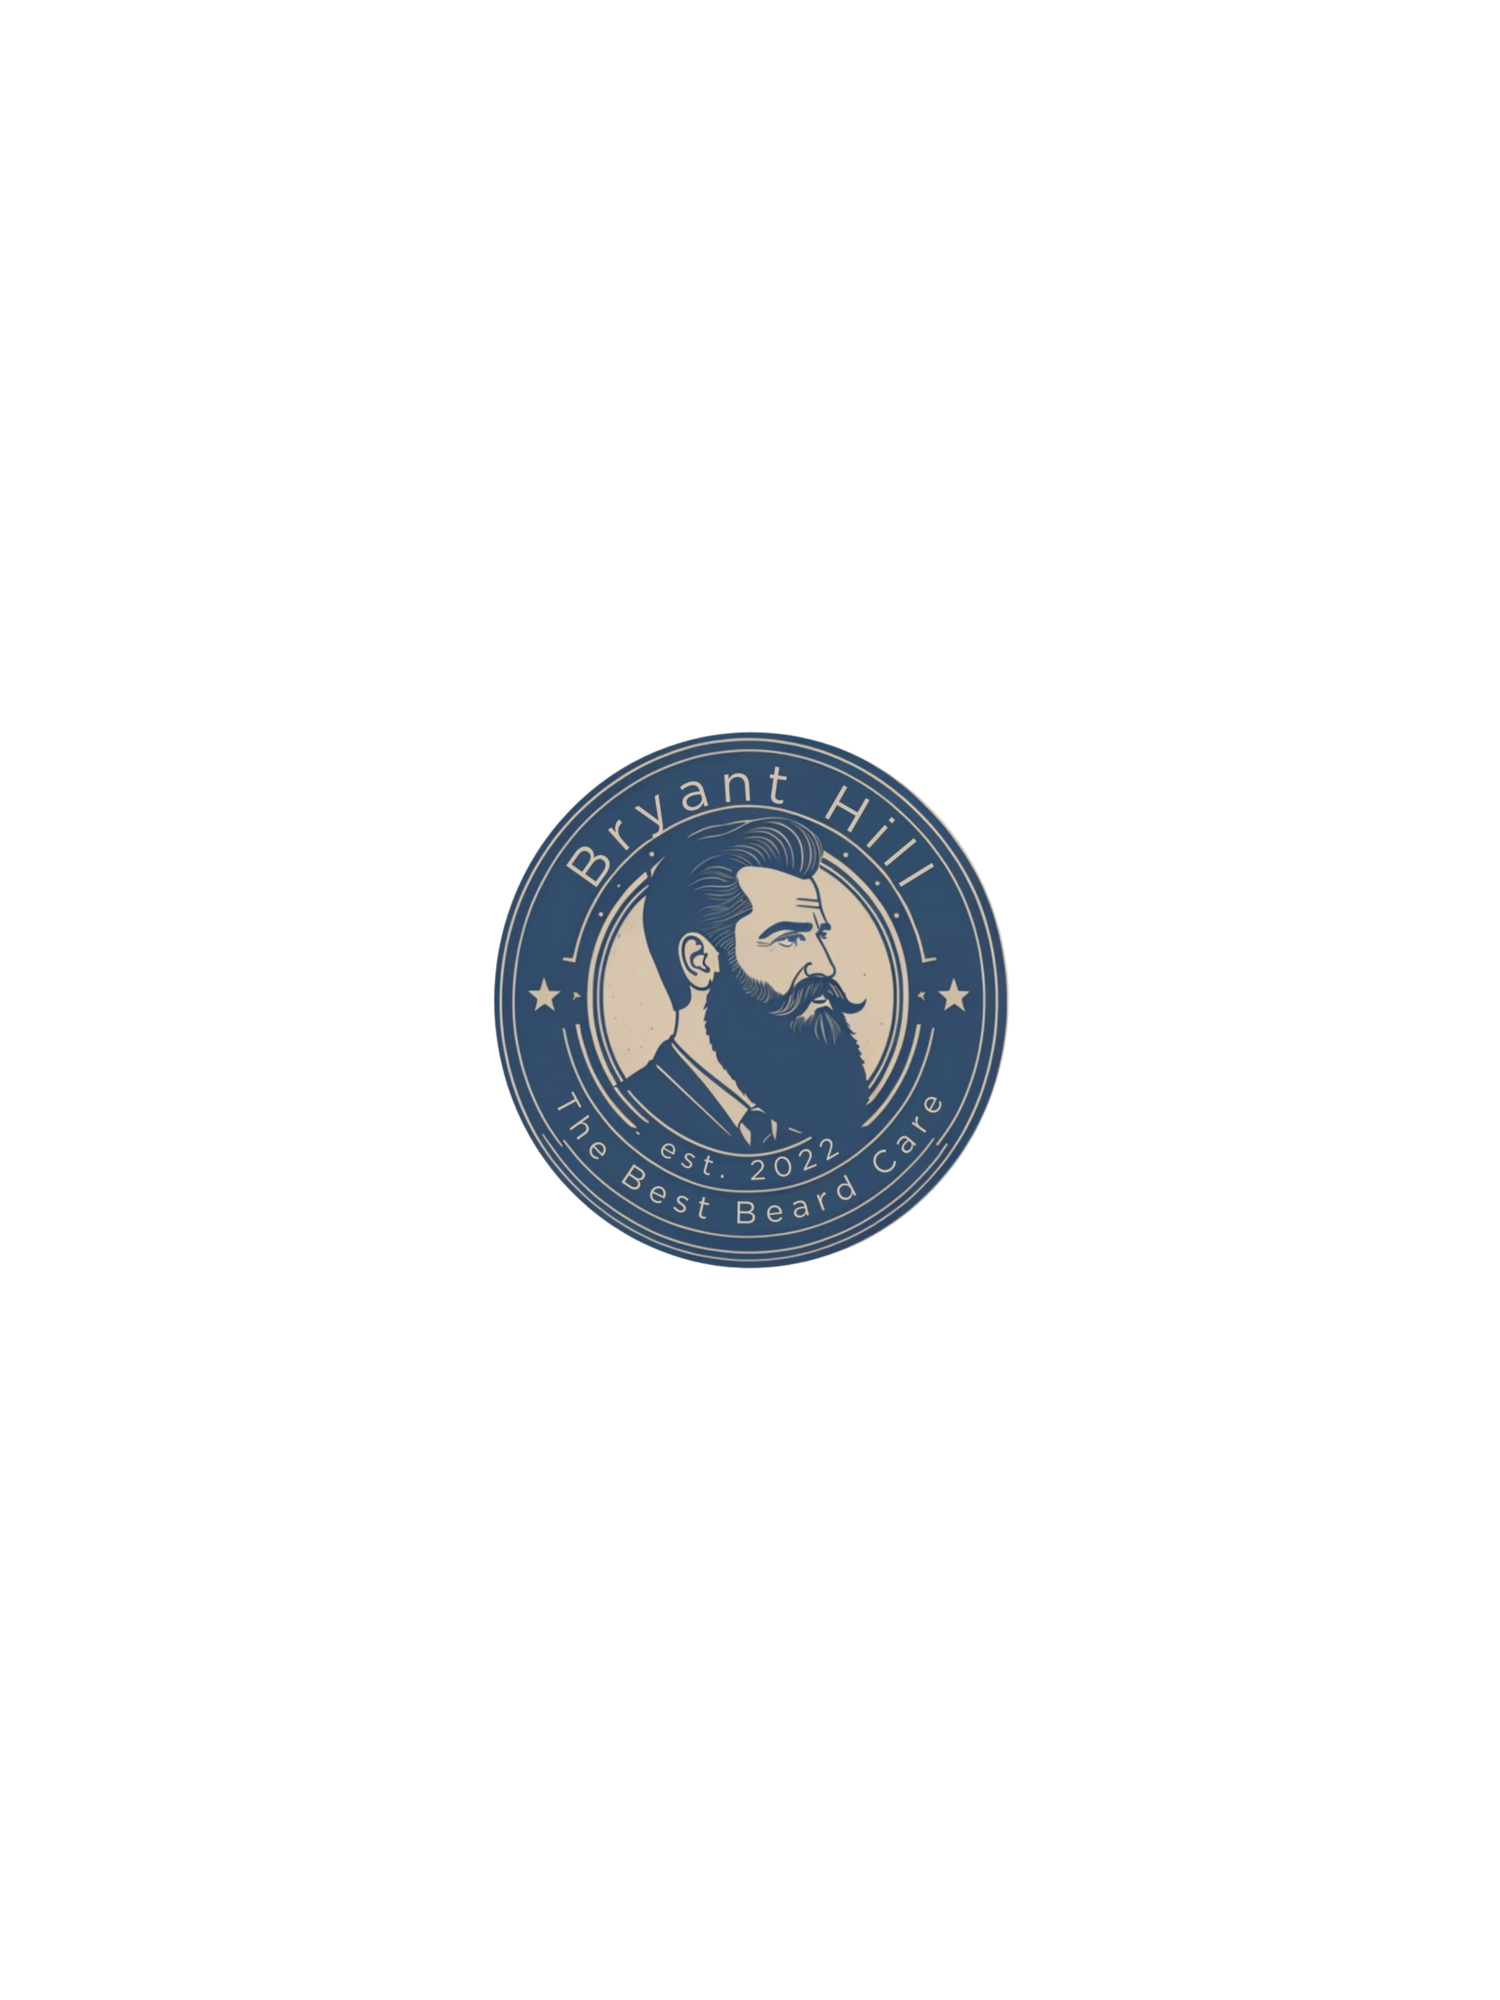 Bryant Hill Beard Care: The Ultimate Solution for The Best Beard Care